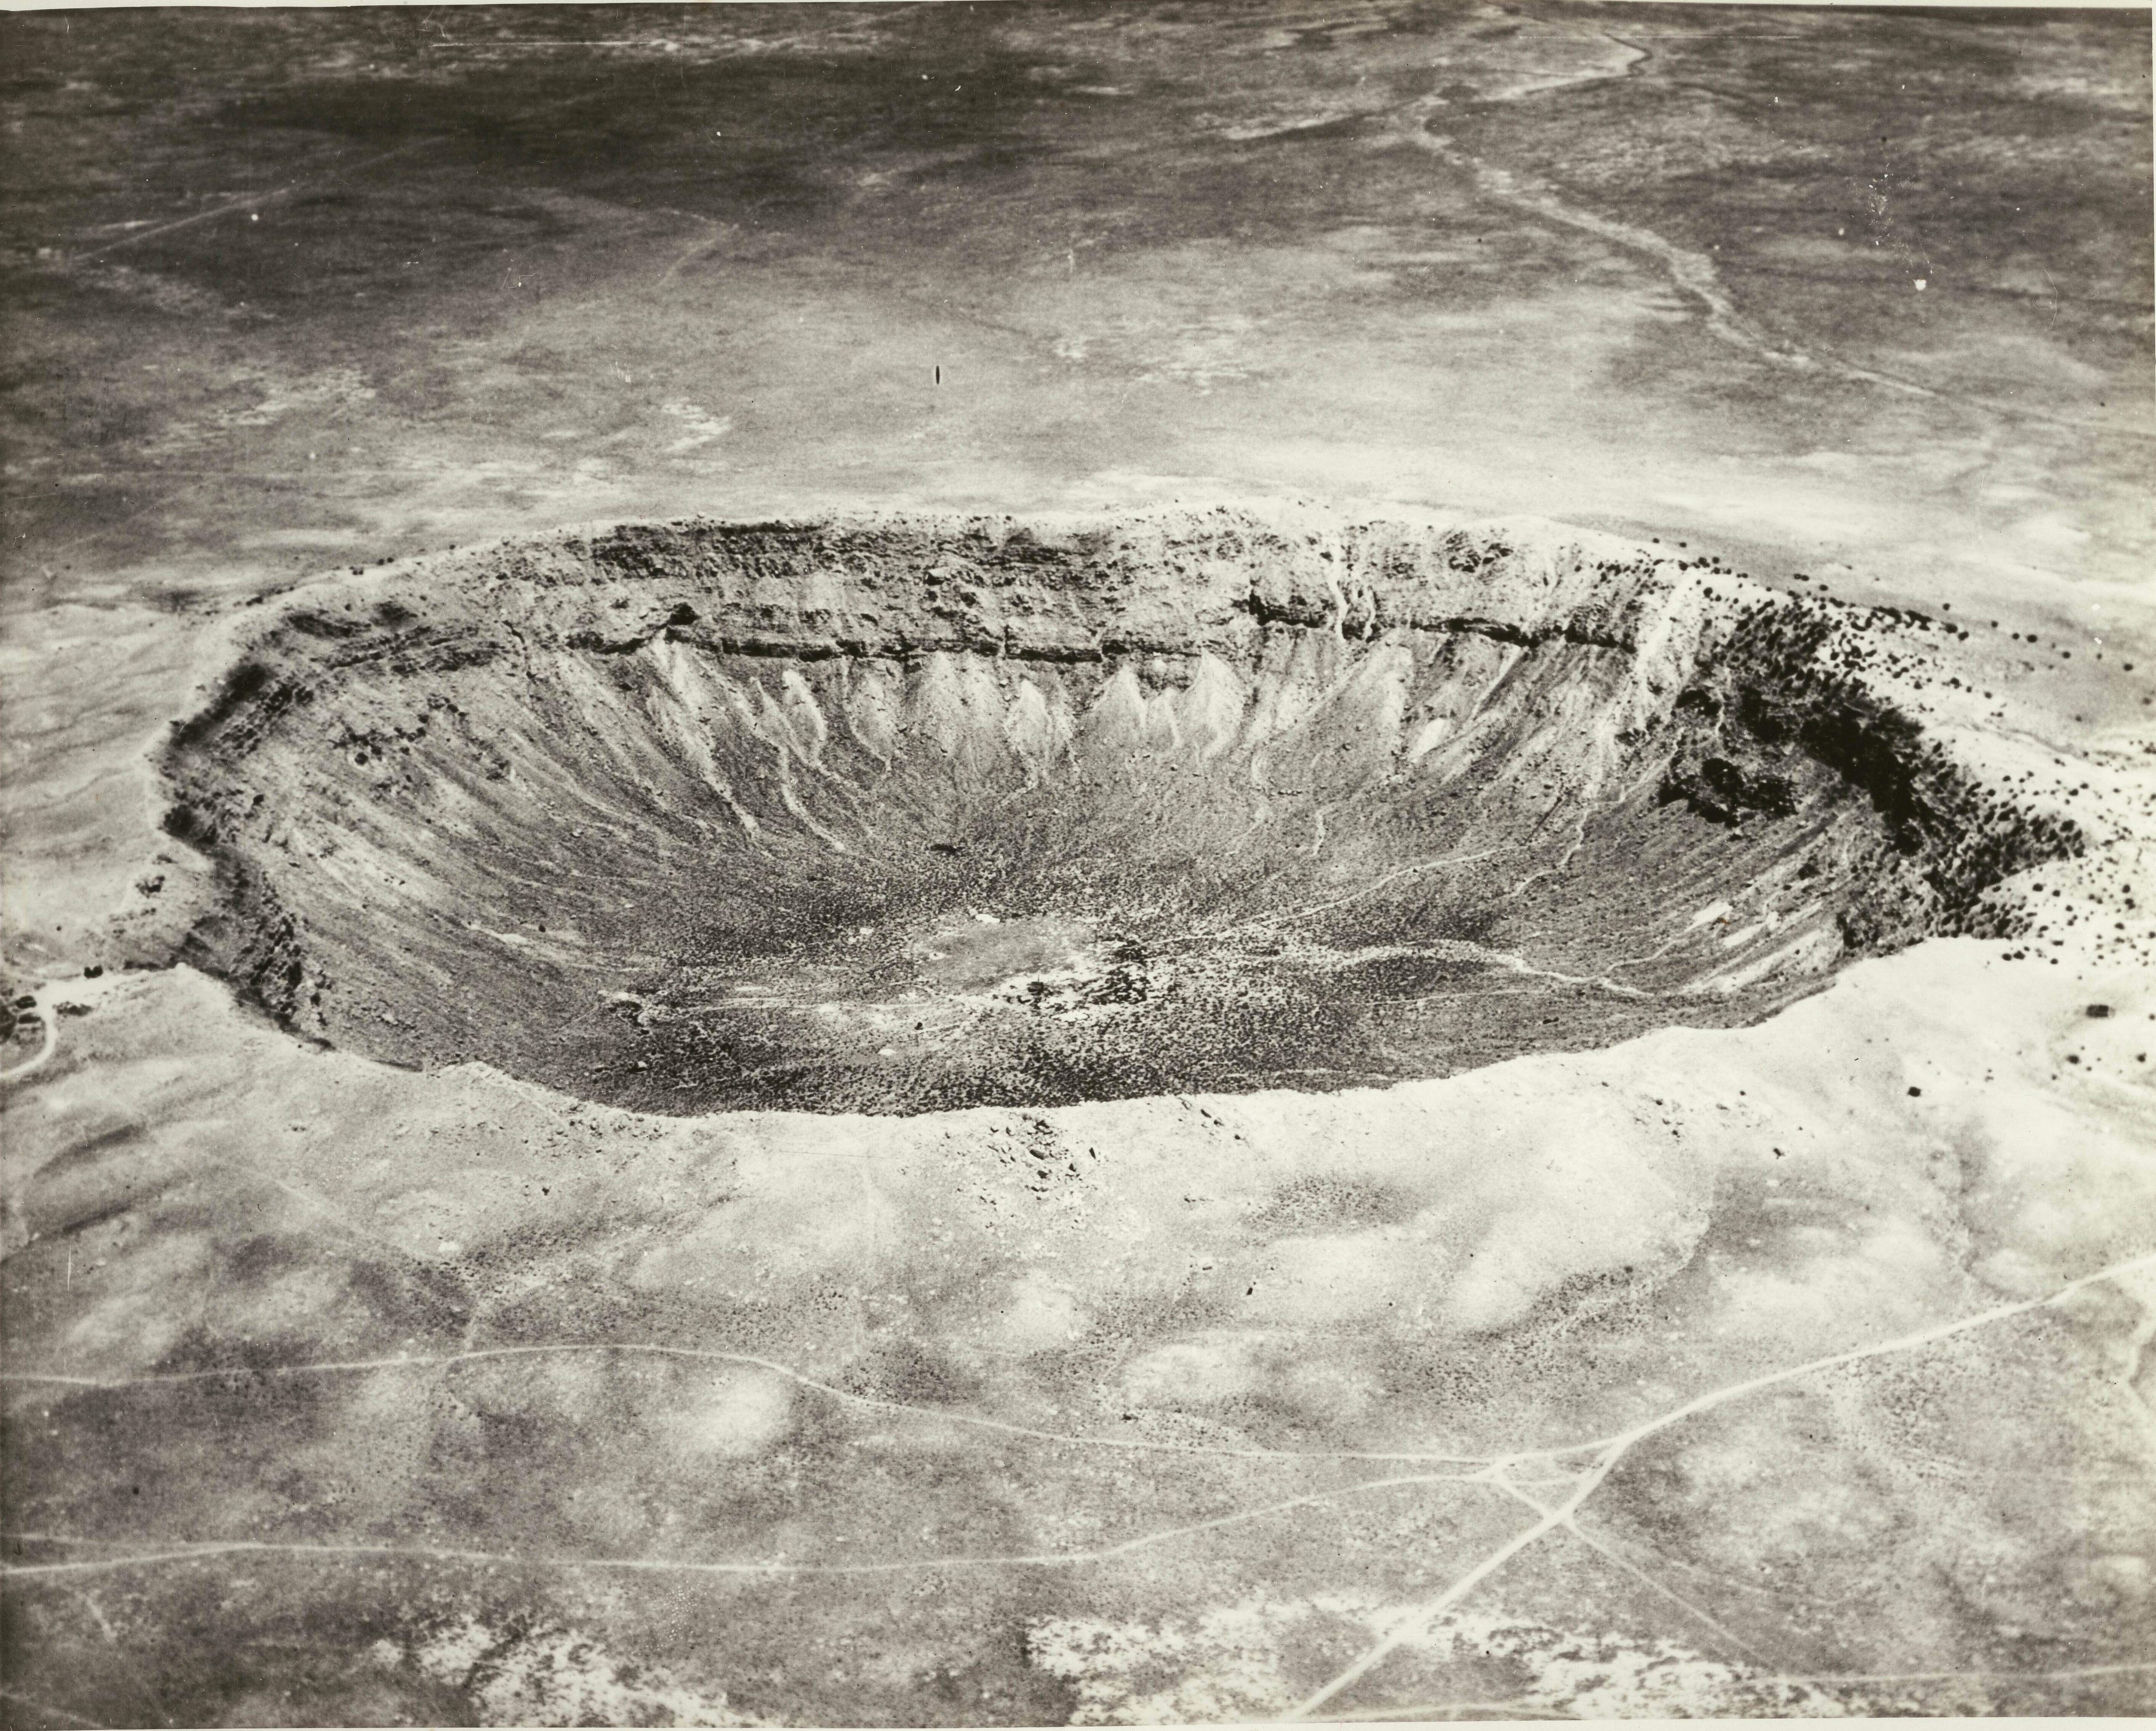 Photograph of the Barringer Crater in Arizona, ca. 1920. A large depression is pictured at center, striated with different colors of sand and other mineral deposits. The surrounding area appears to be barren and flat. | src USC